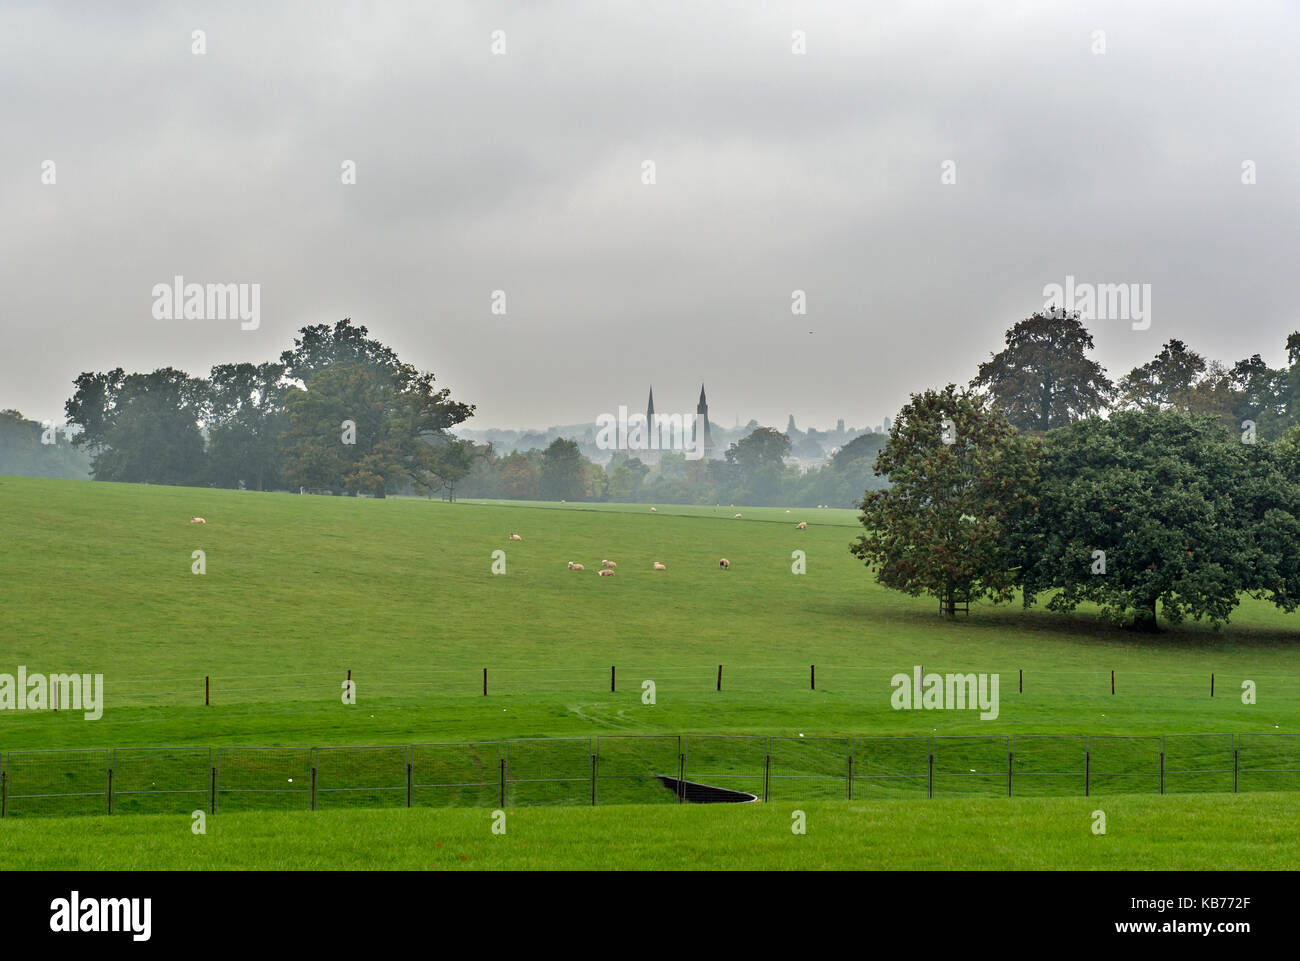 Church Spires of Stamford, Lincolnshire in the misty distance. Stock Photo